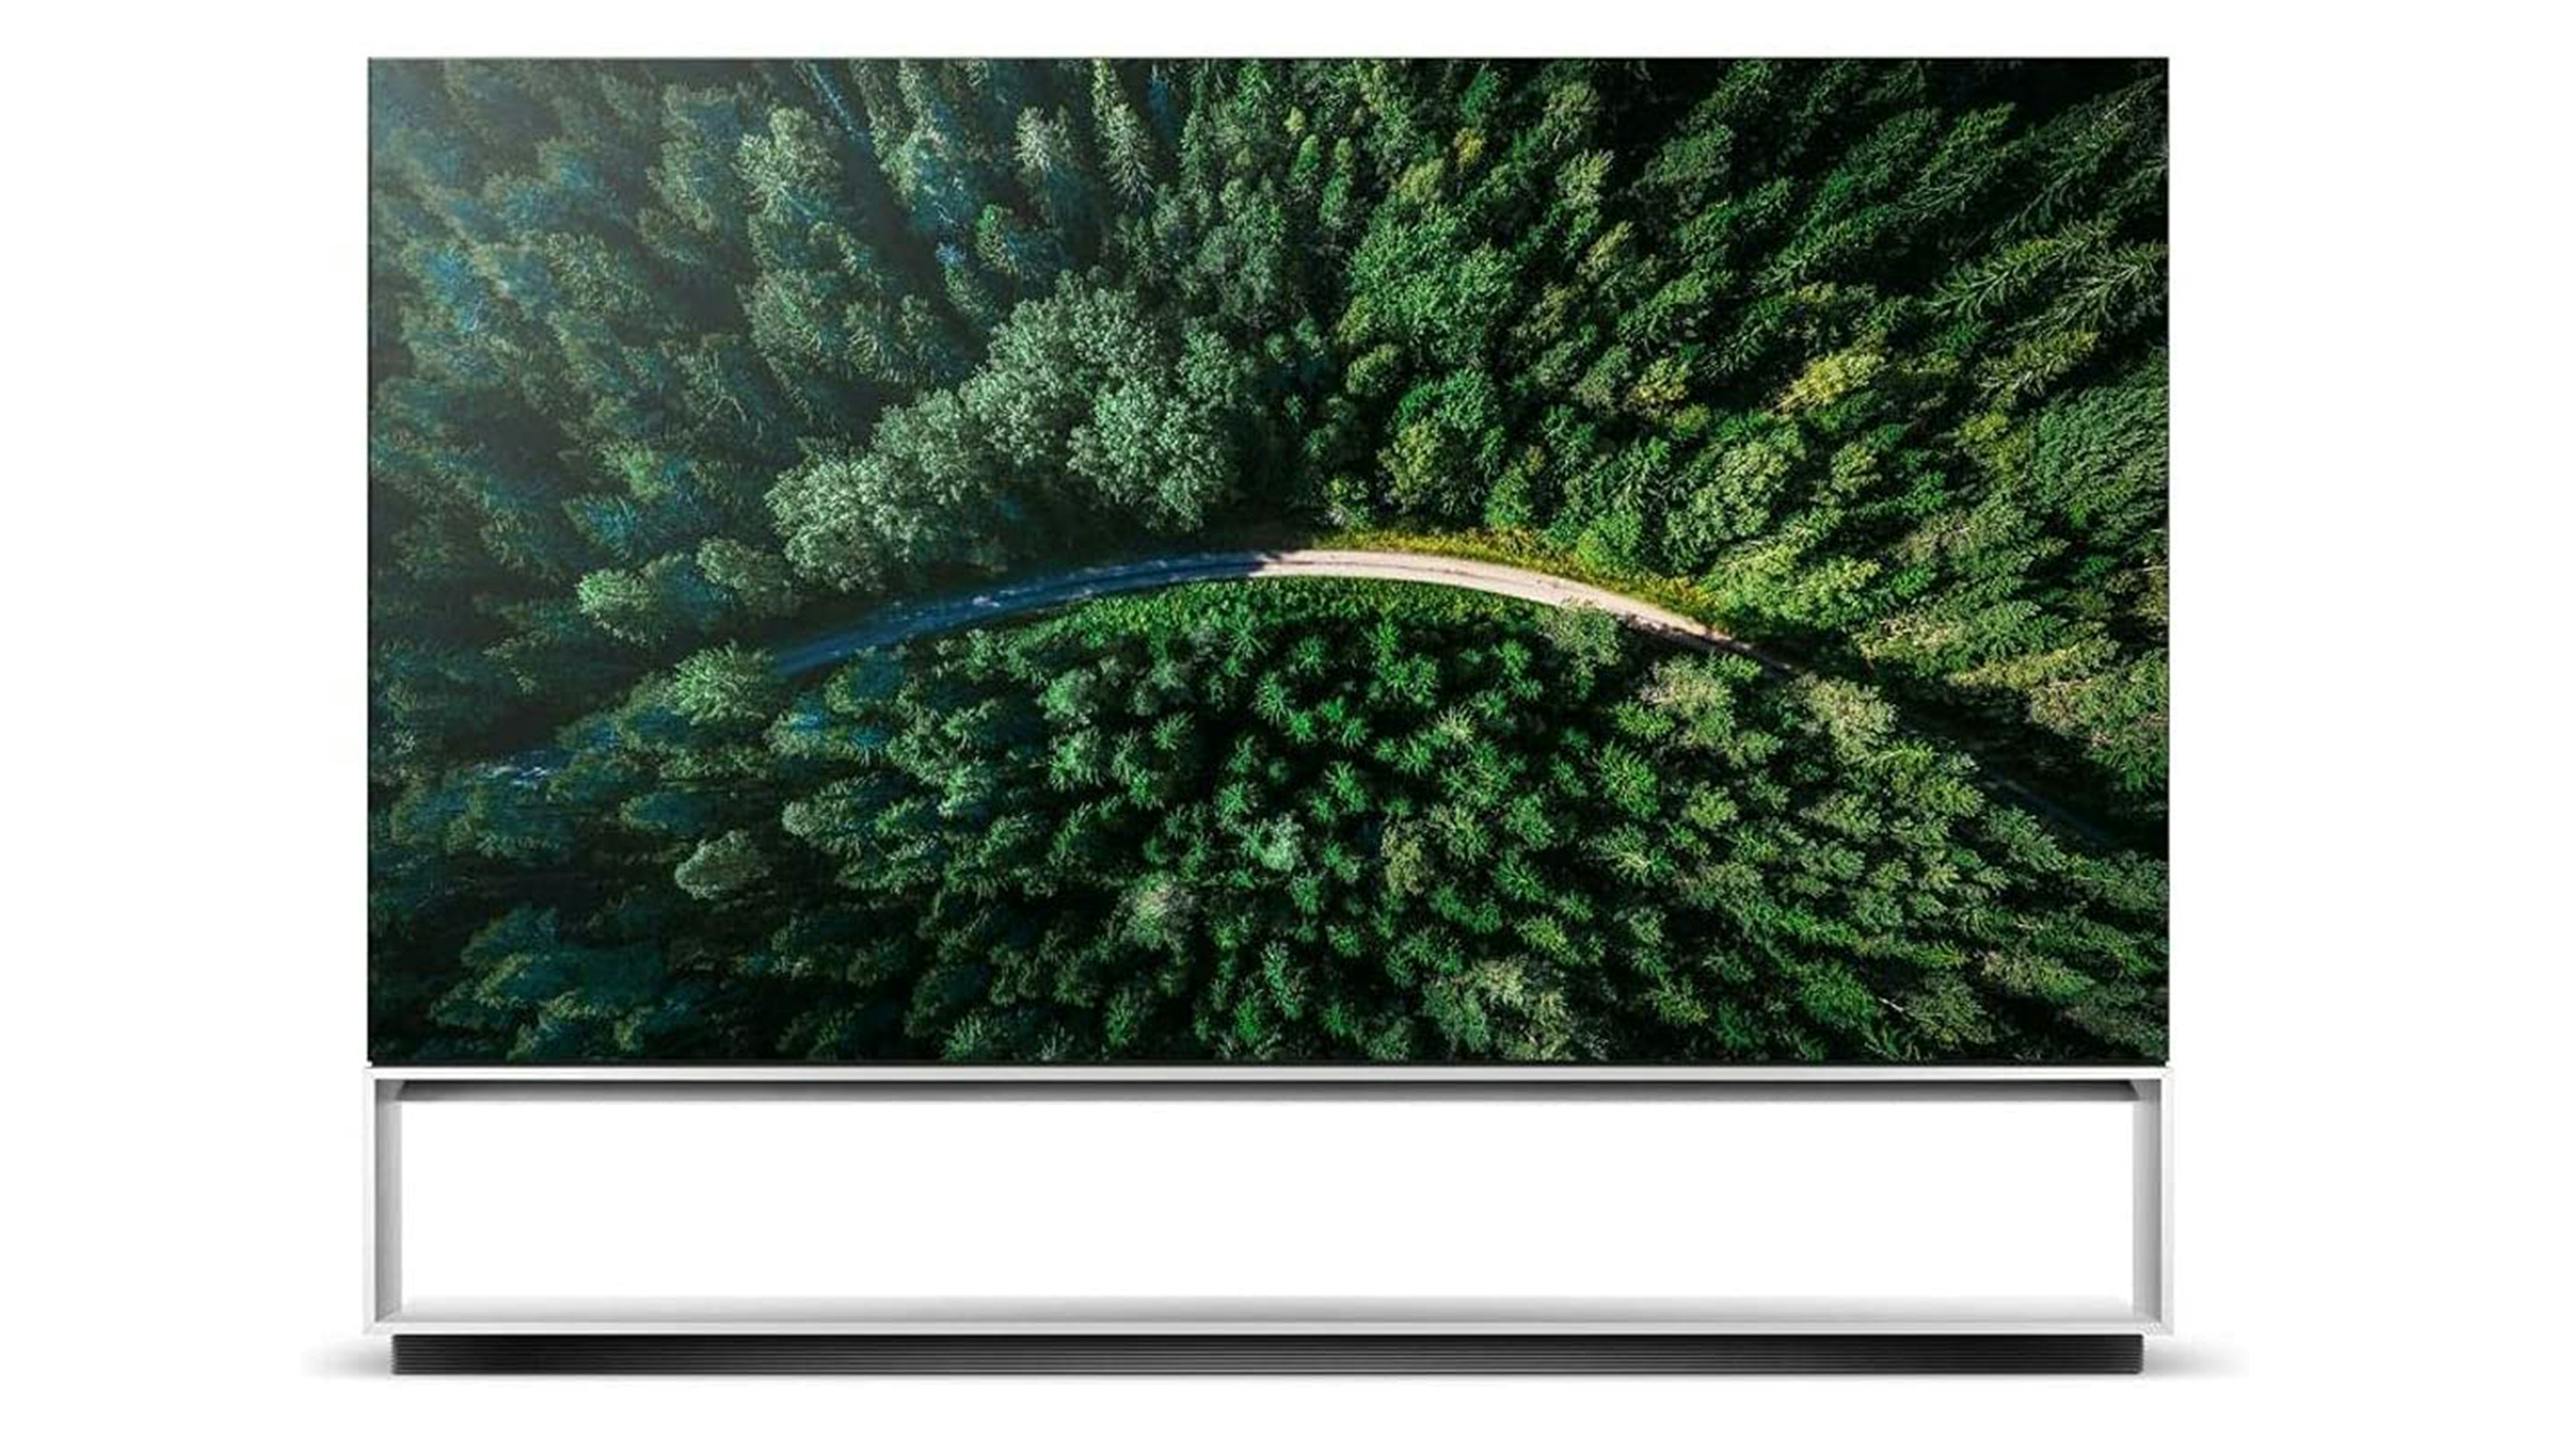 LG Signature OLED TV front facing product image.